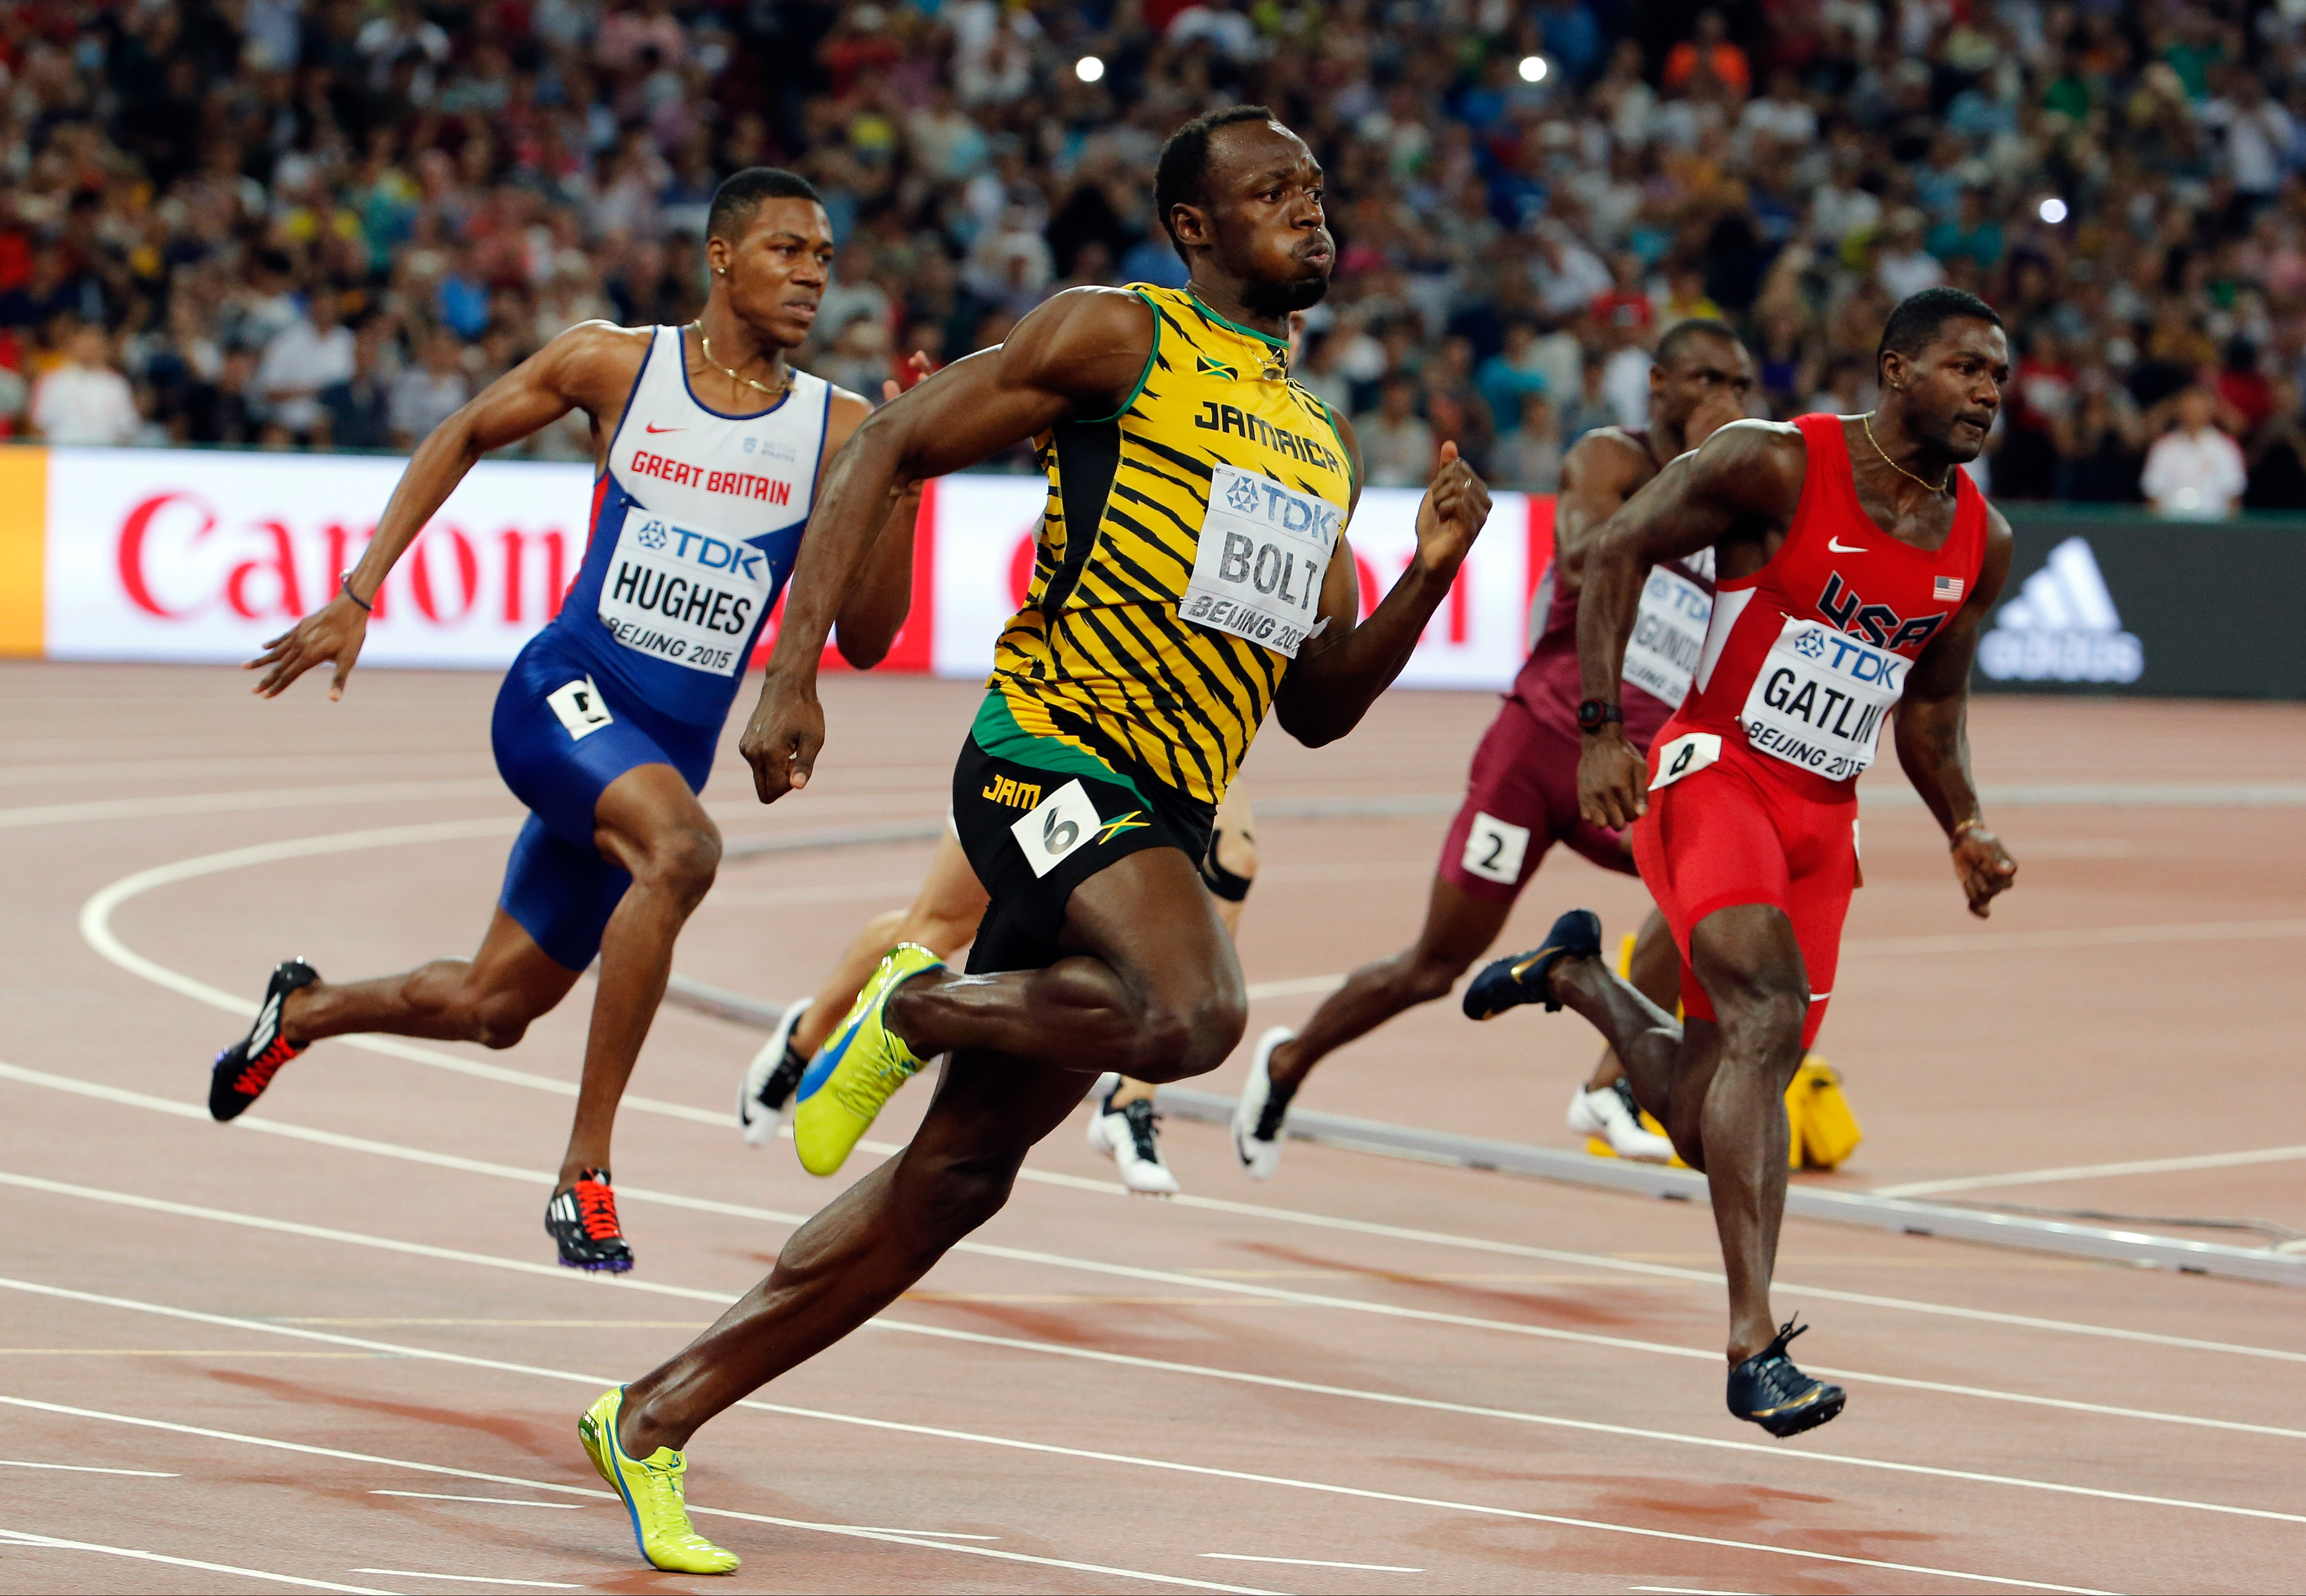 Jamaica's Usain Bolt races to the gold medal in the men's 200m final at the at the World Athletics Championships at the Bird's Nest stadium in Beijing, Thursday, Aug. 27, 2015. (AP Photo/Ng Han Guan)